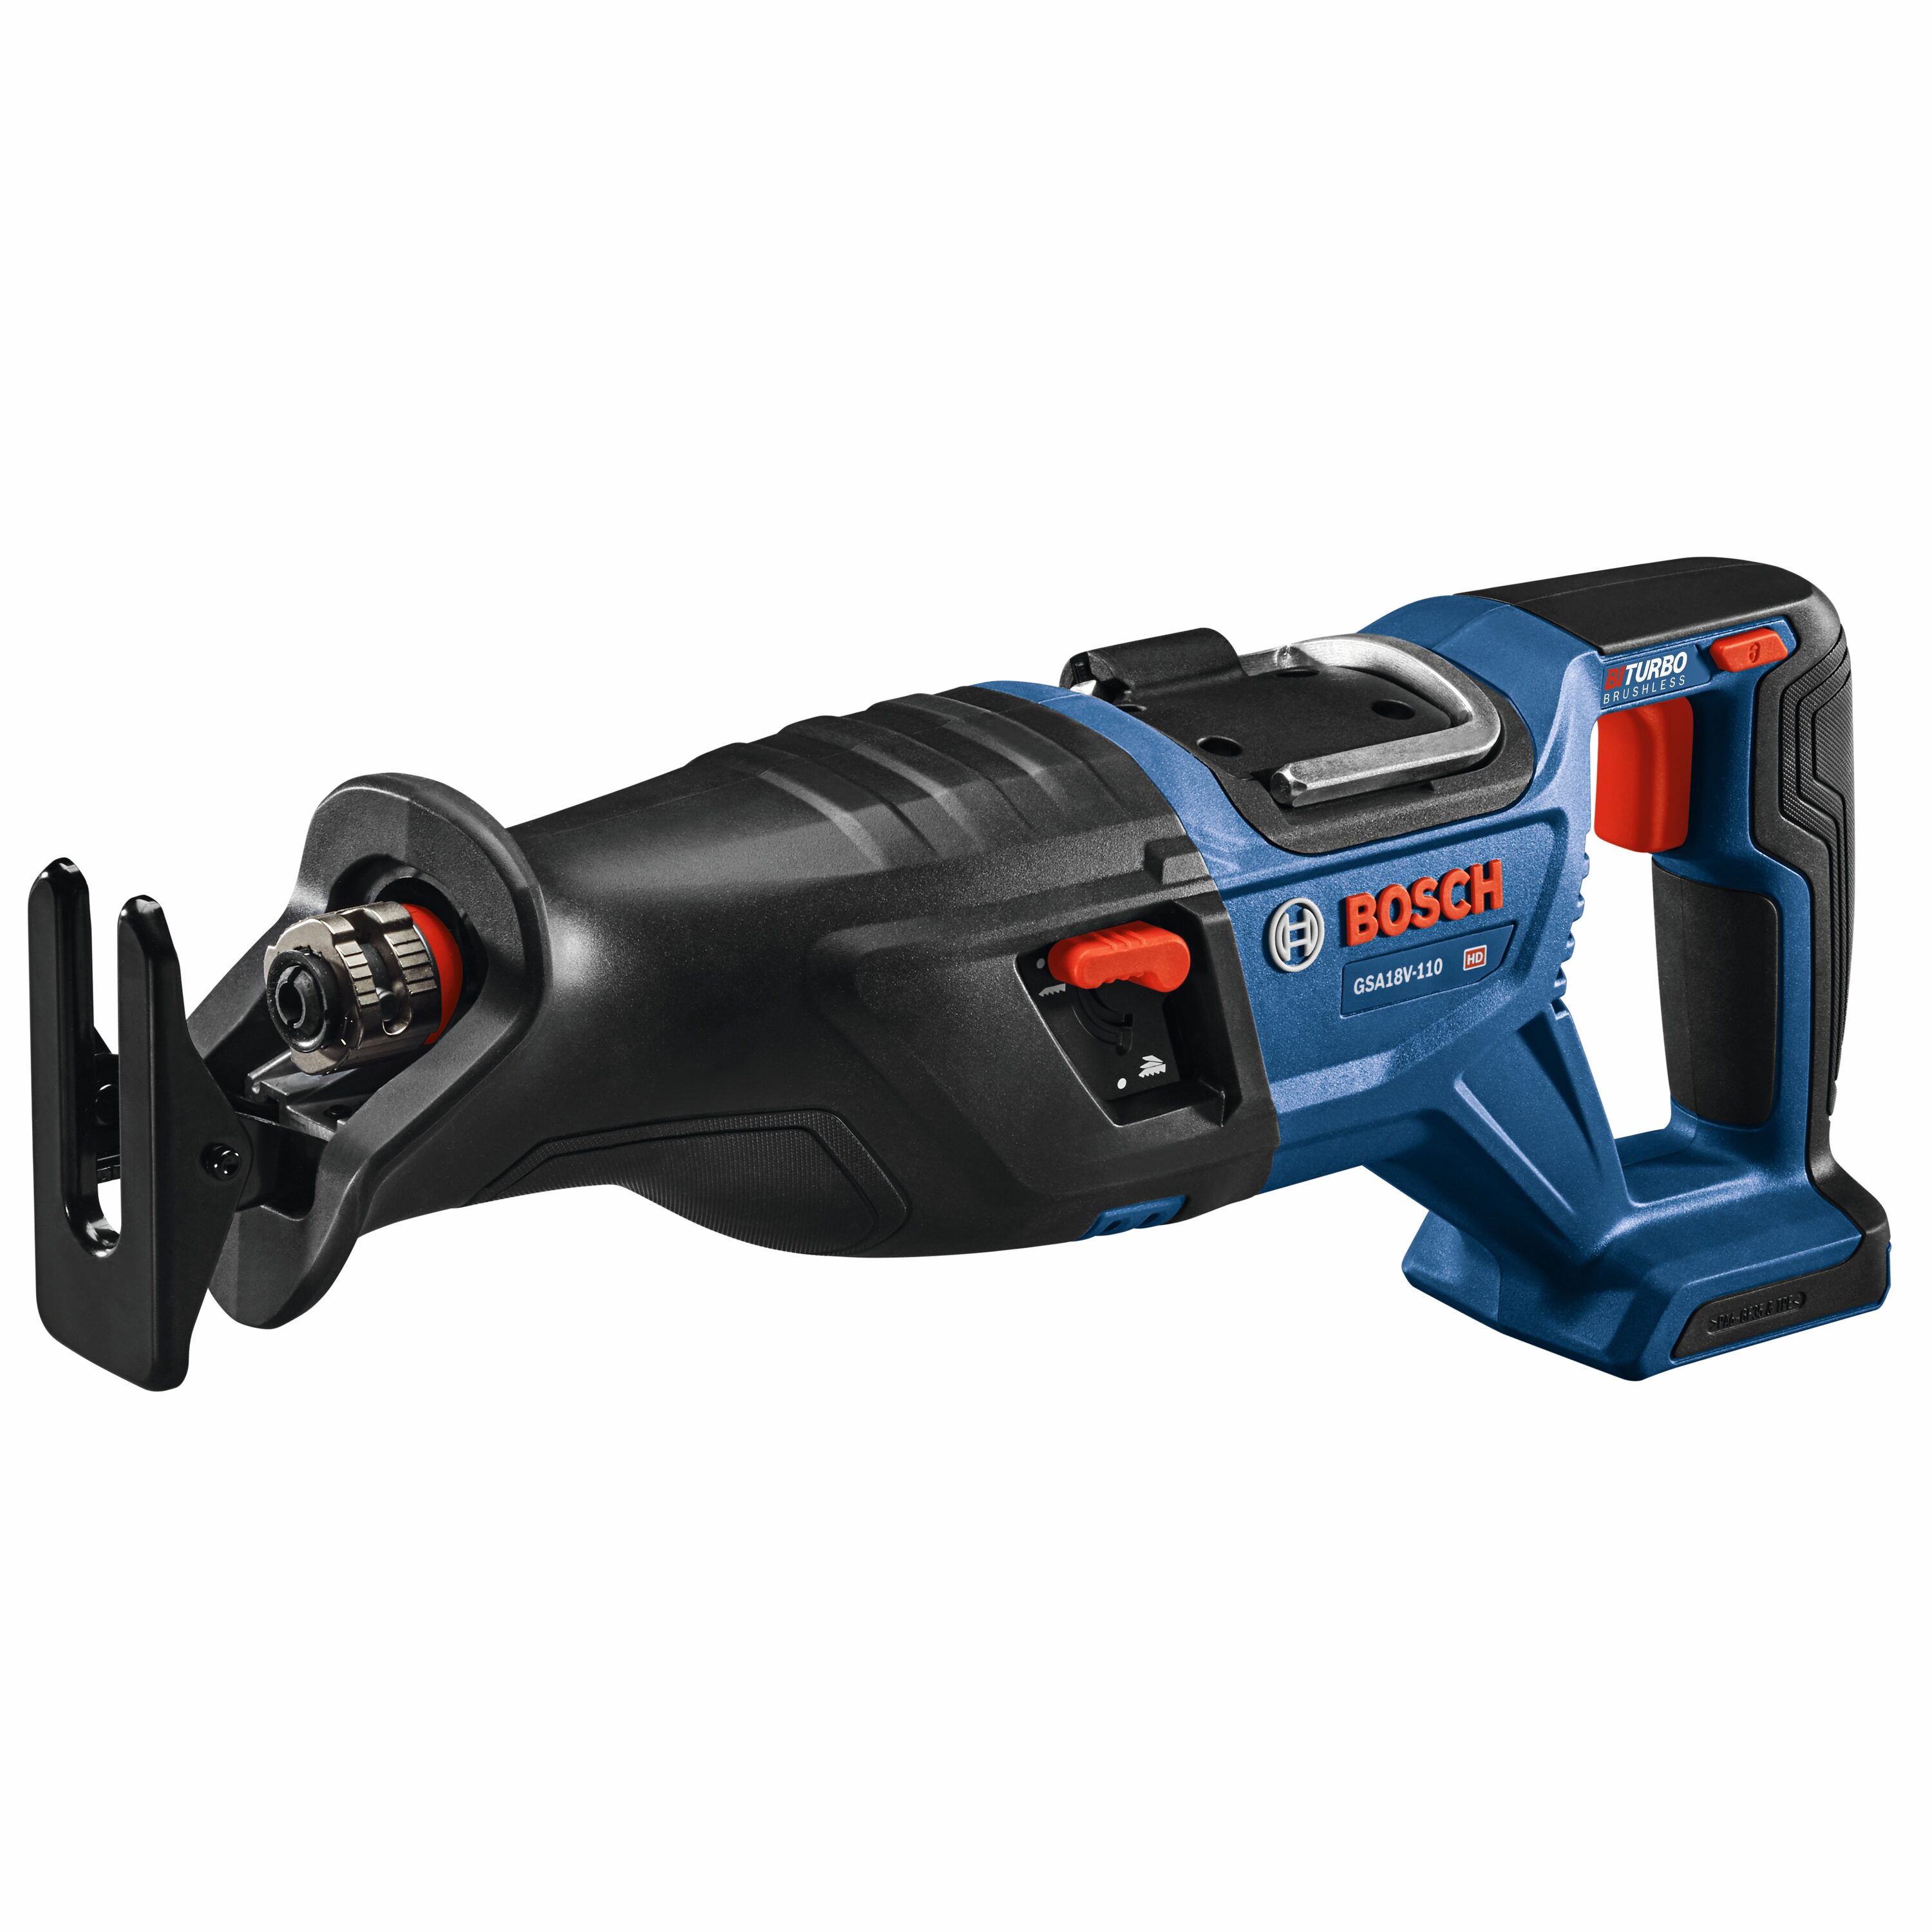 Bosch 18-volt Variable Speed Brushless Cordless Reciprocating Saw